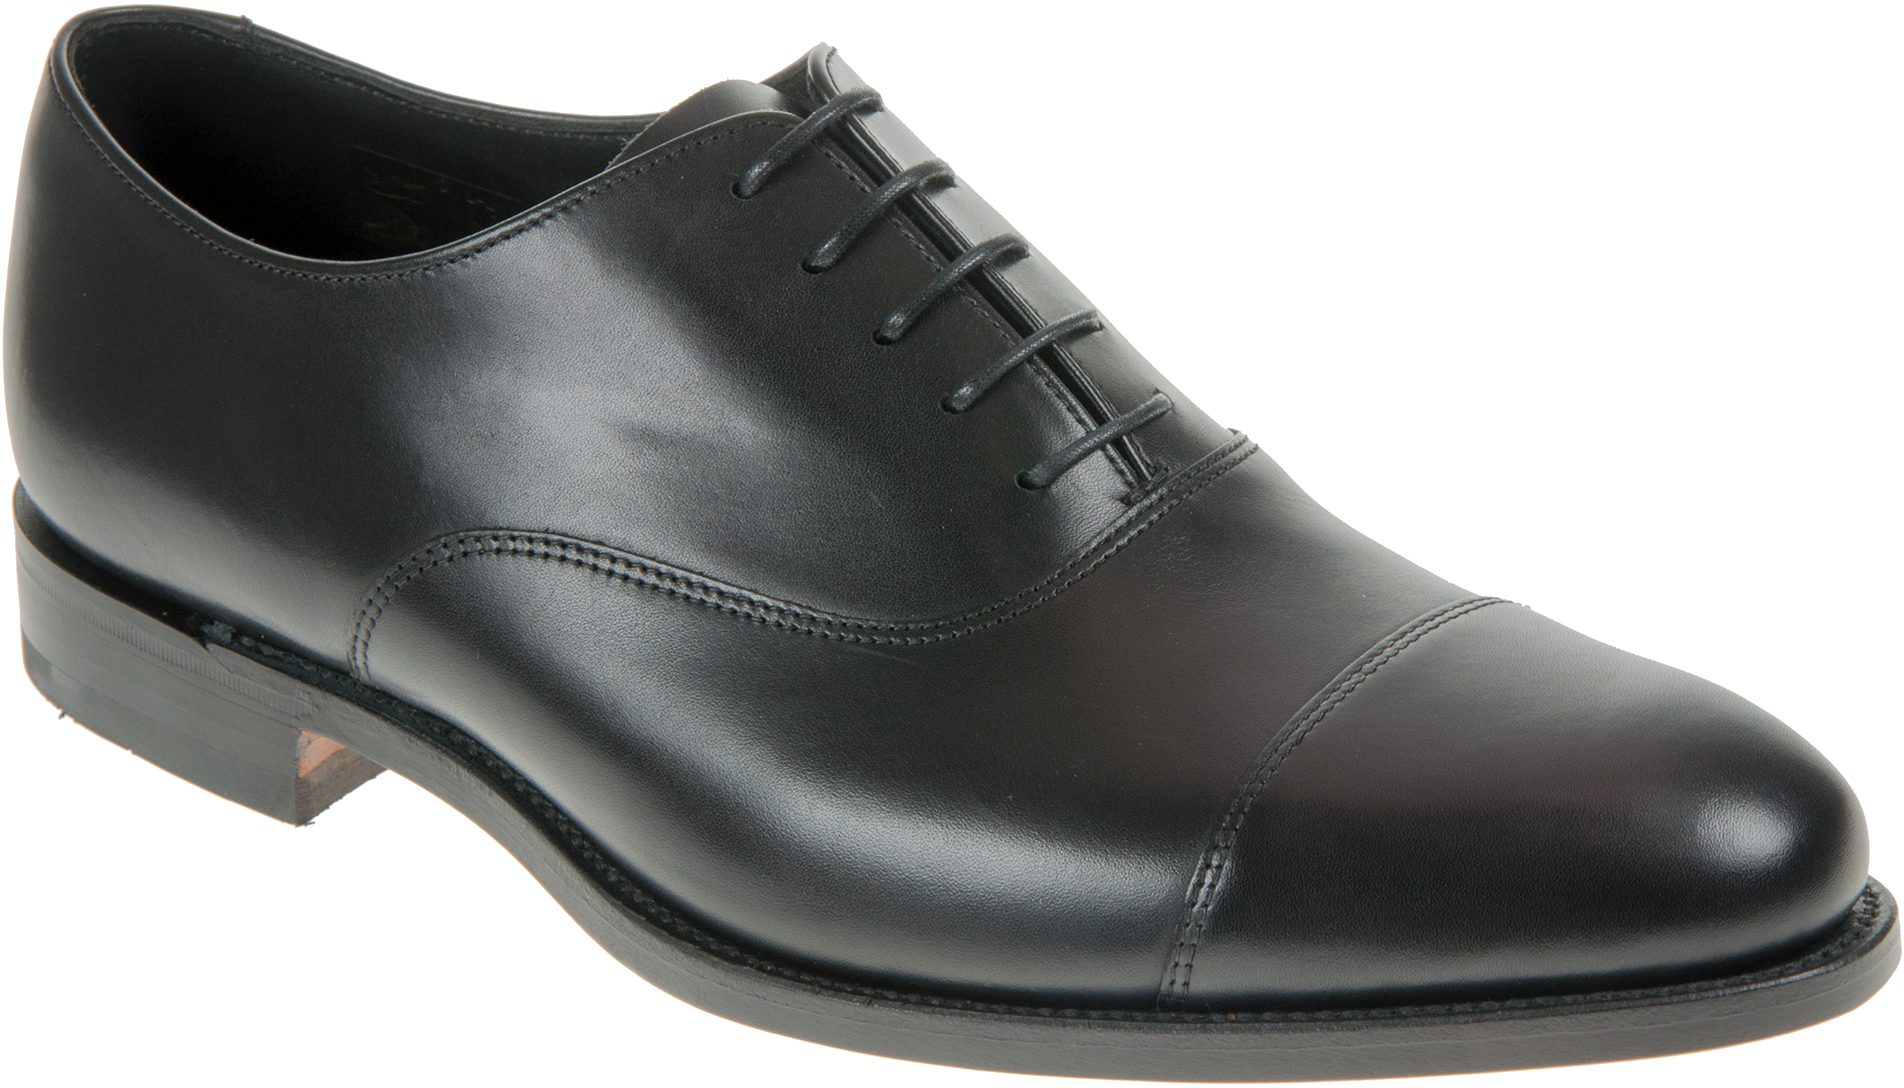 Loake Holborn Black - Formal Shoes - Humphries Shoes